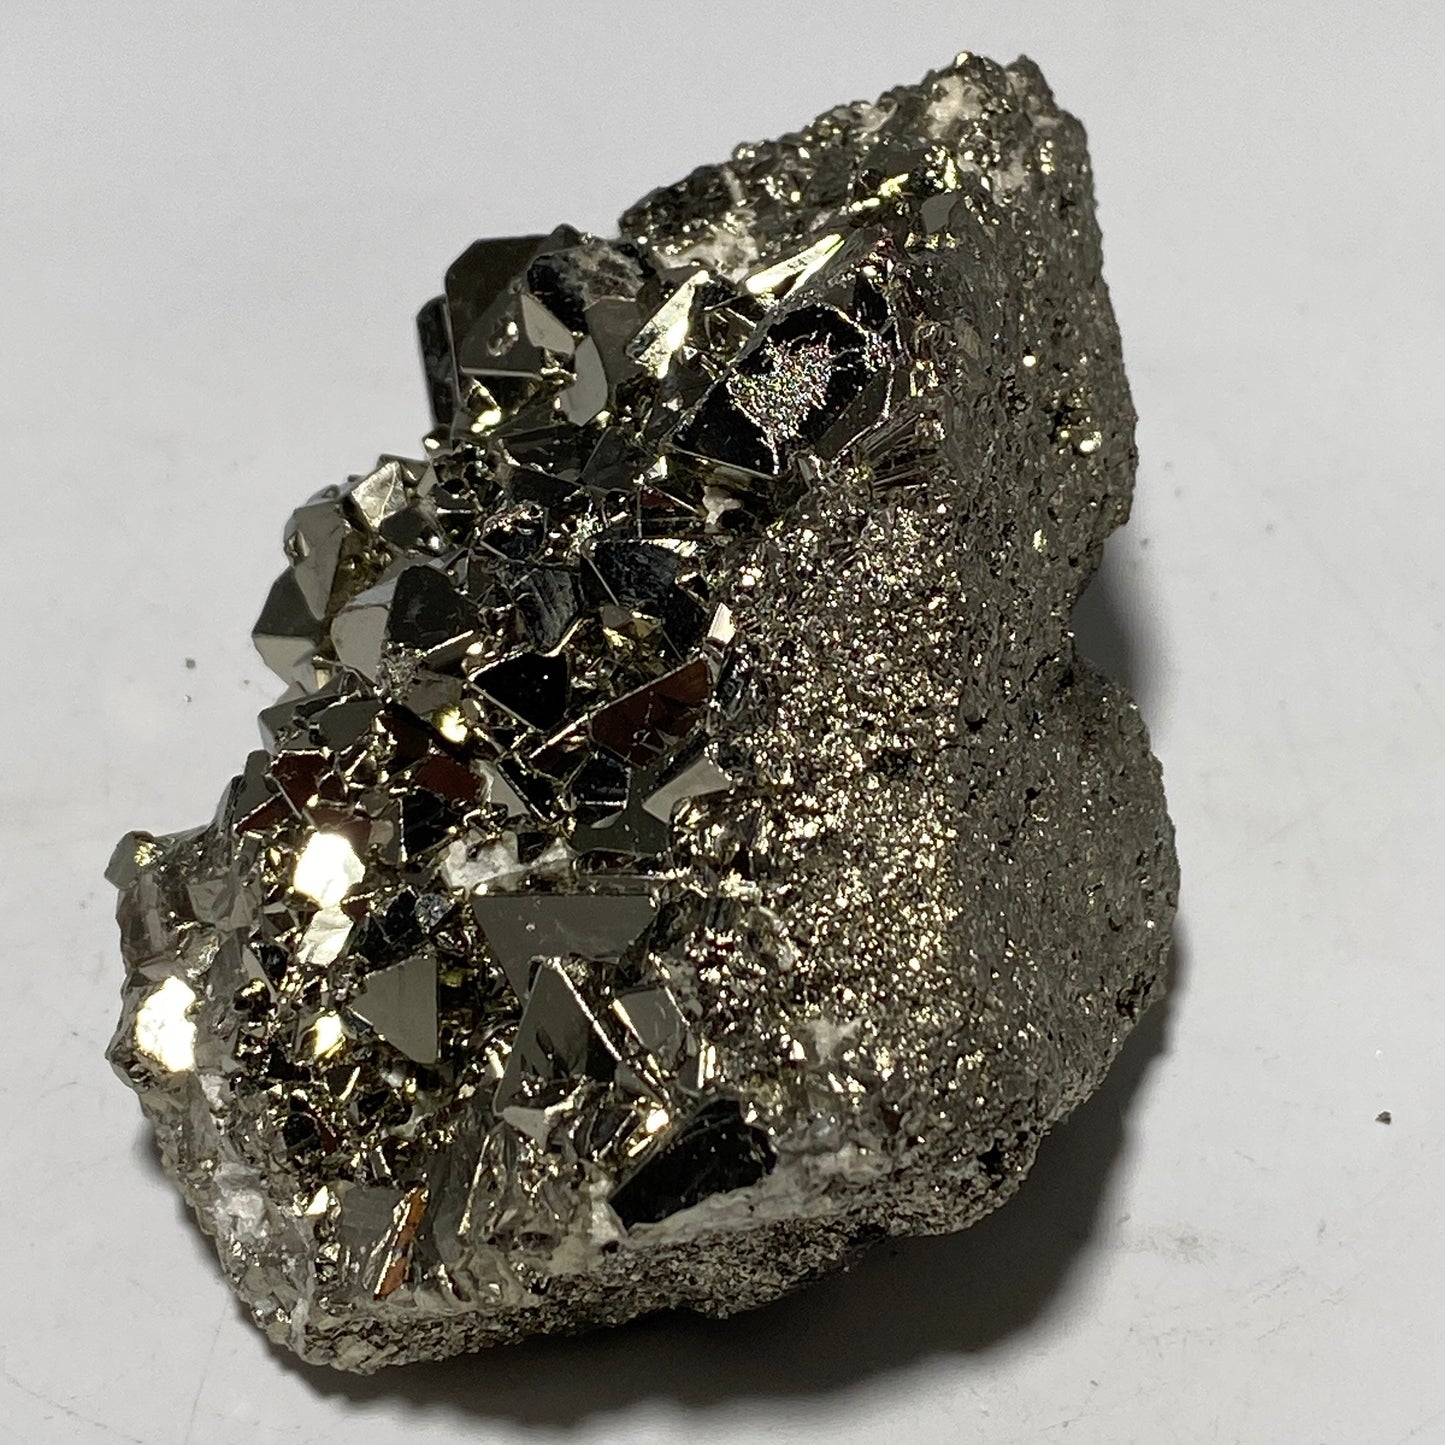 Peruvian Pyrite Crystal Specimen | Great gift for a rock lover or addition to your own collection, Peru Mineral